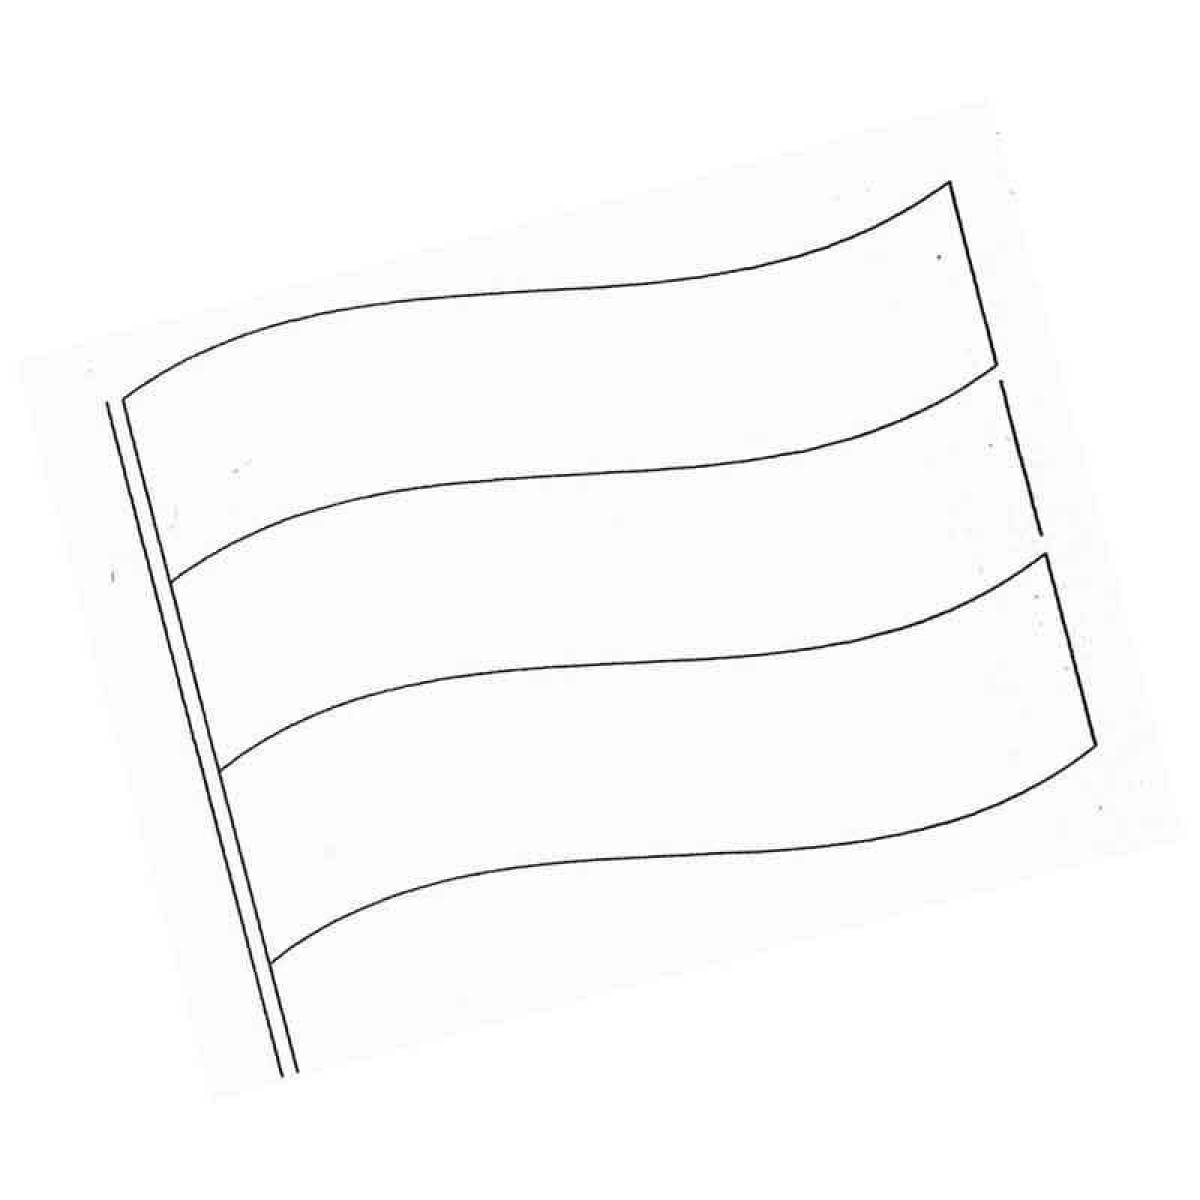 Shining Russian flag coloring page for kids